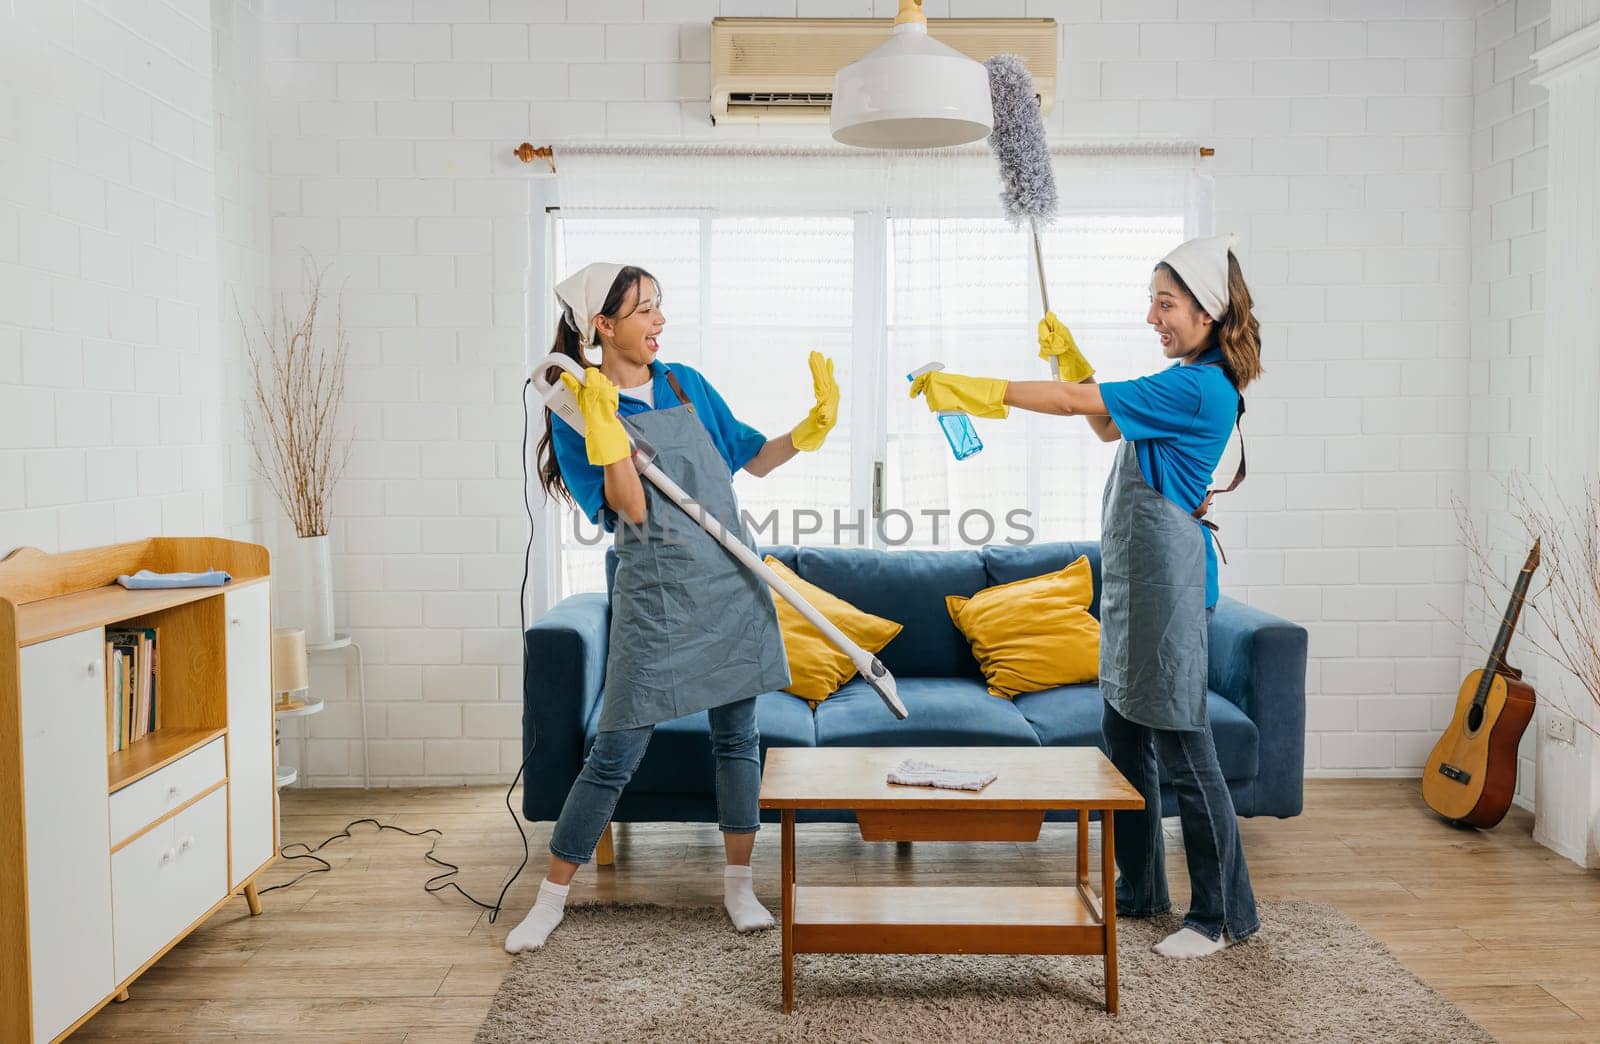 Asian maid joyful cleaning, vacuum as guitar husband playful twist. Singing dancing happily. Music-filled service brings excitement to household chores. Cleaning is fun by Sorapop